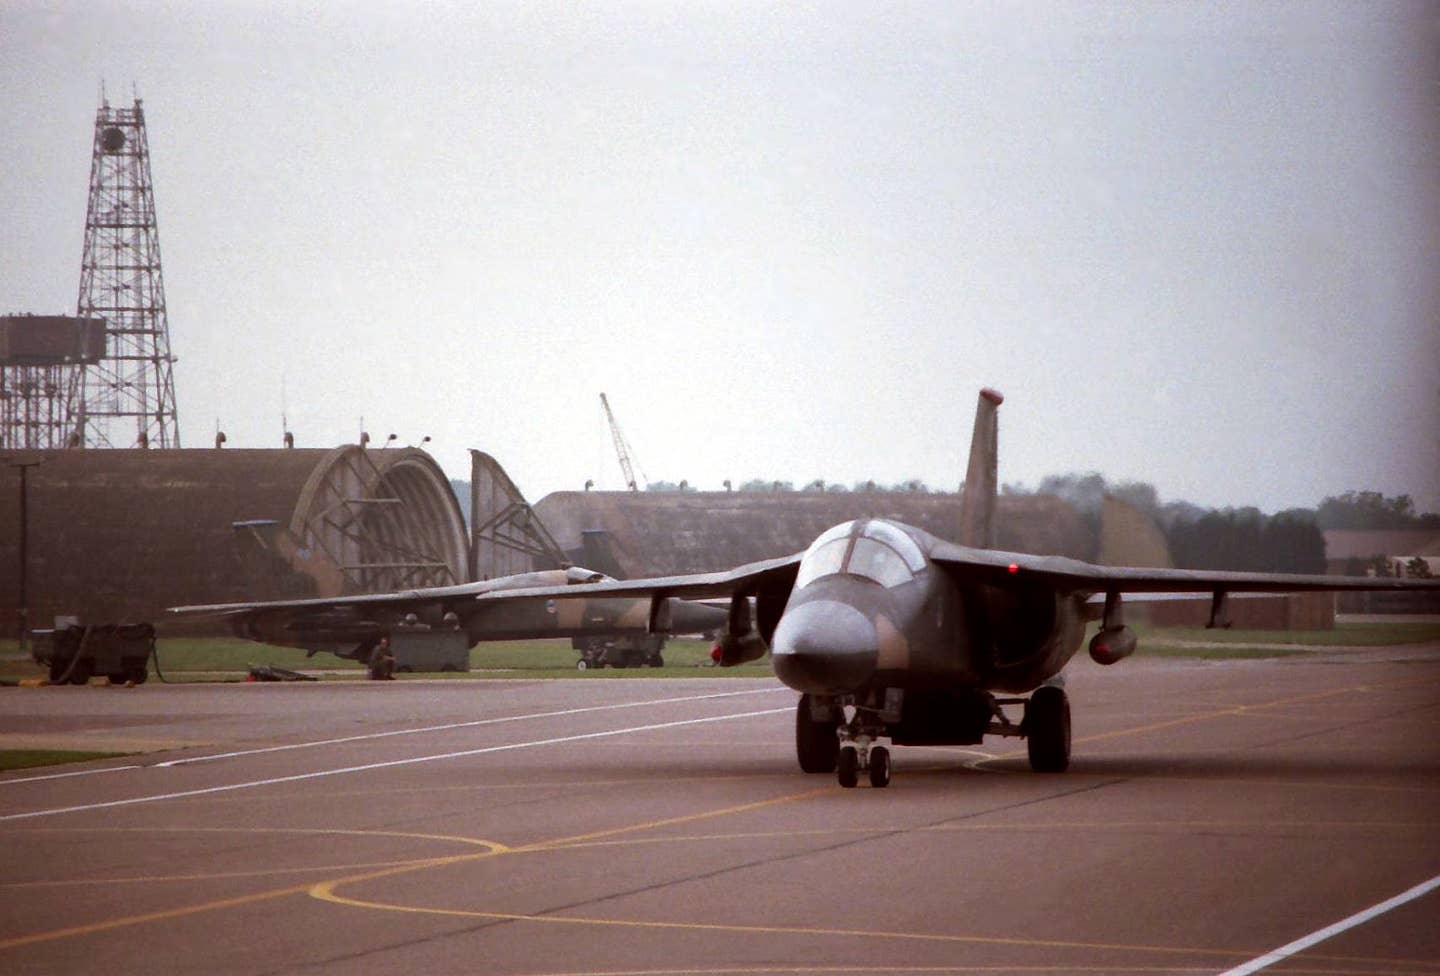 A hot ship: F-111F 70-2376 of the 48th Tactical Fighter Wing at RAF Lakenheath in 1989. <a href="https://www.flickr.com/photos/harryclaggers/33672082400/" target="_blank" rel="noreferrer noopener"><em>Dick Gilbert via Flickr</em></a>